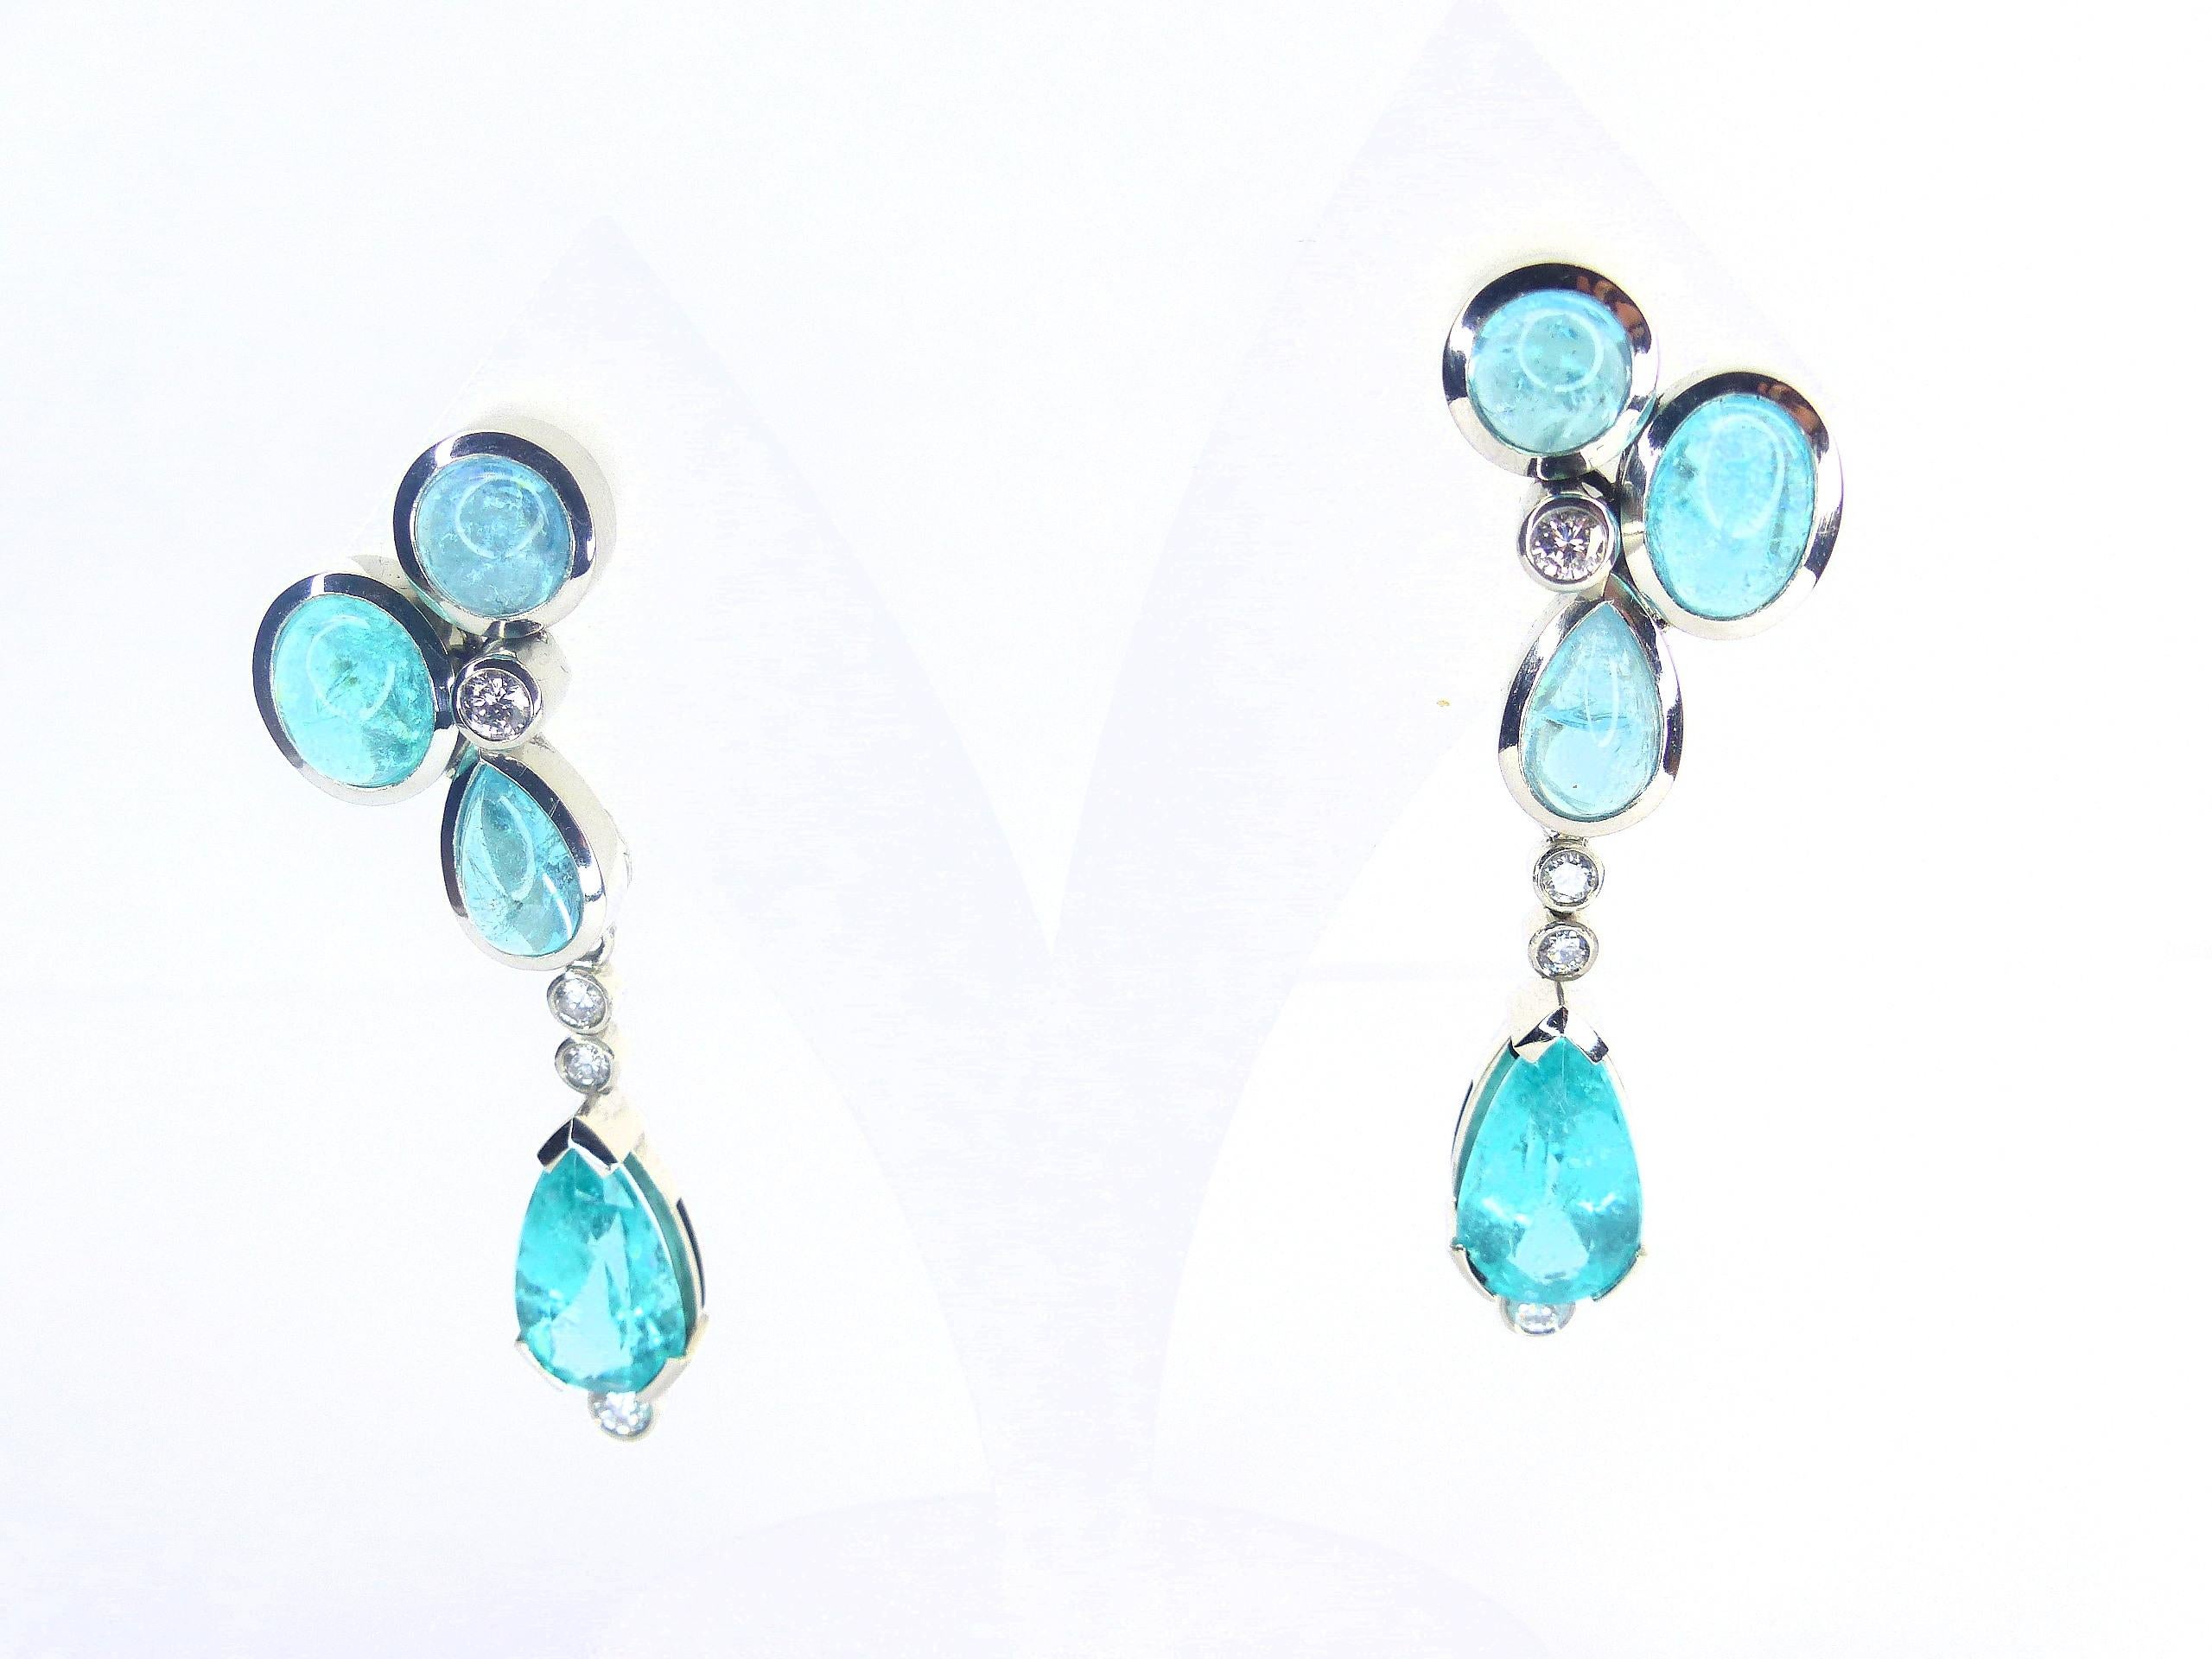 Earrings in Platinum with 6 Paraiba Tourmaline Cabouchons and 2 Diamonds For Sale 4